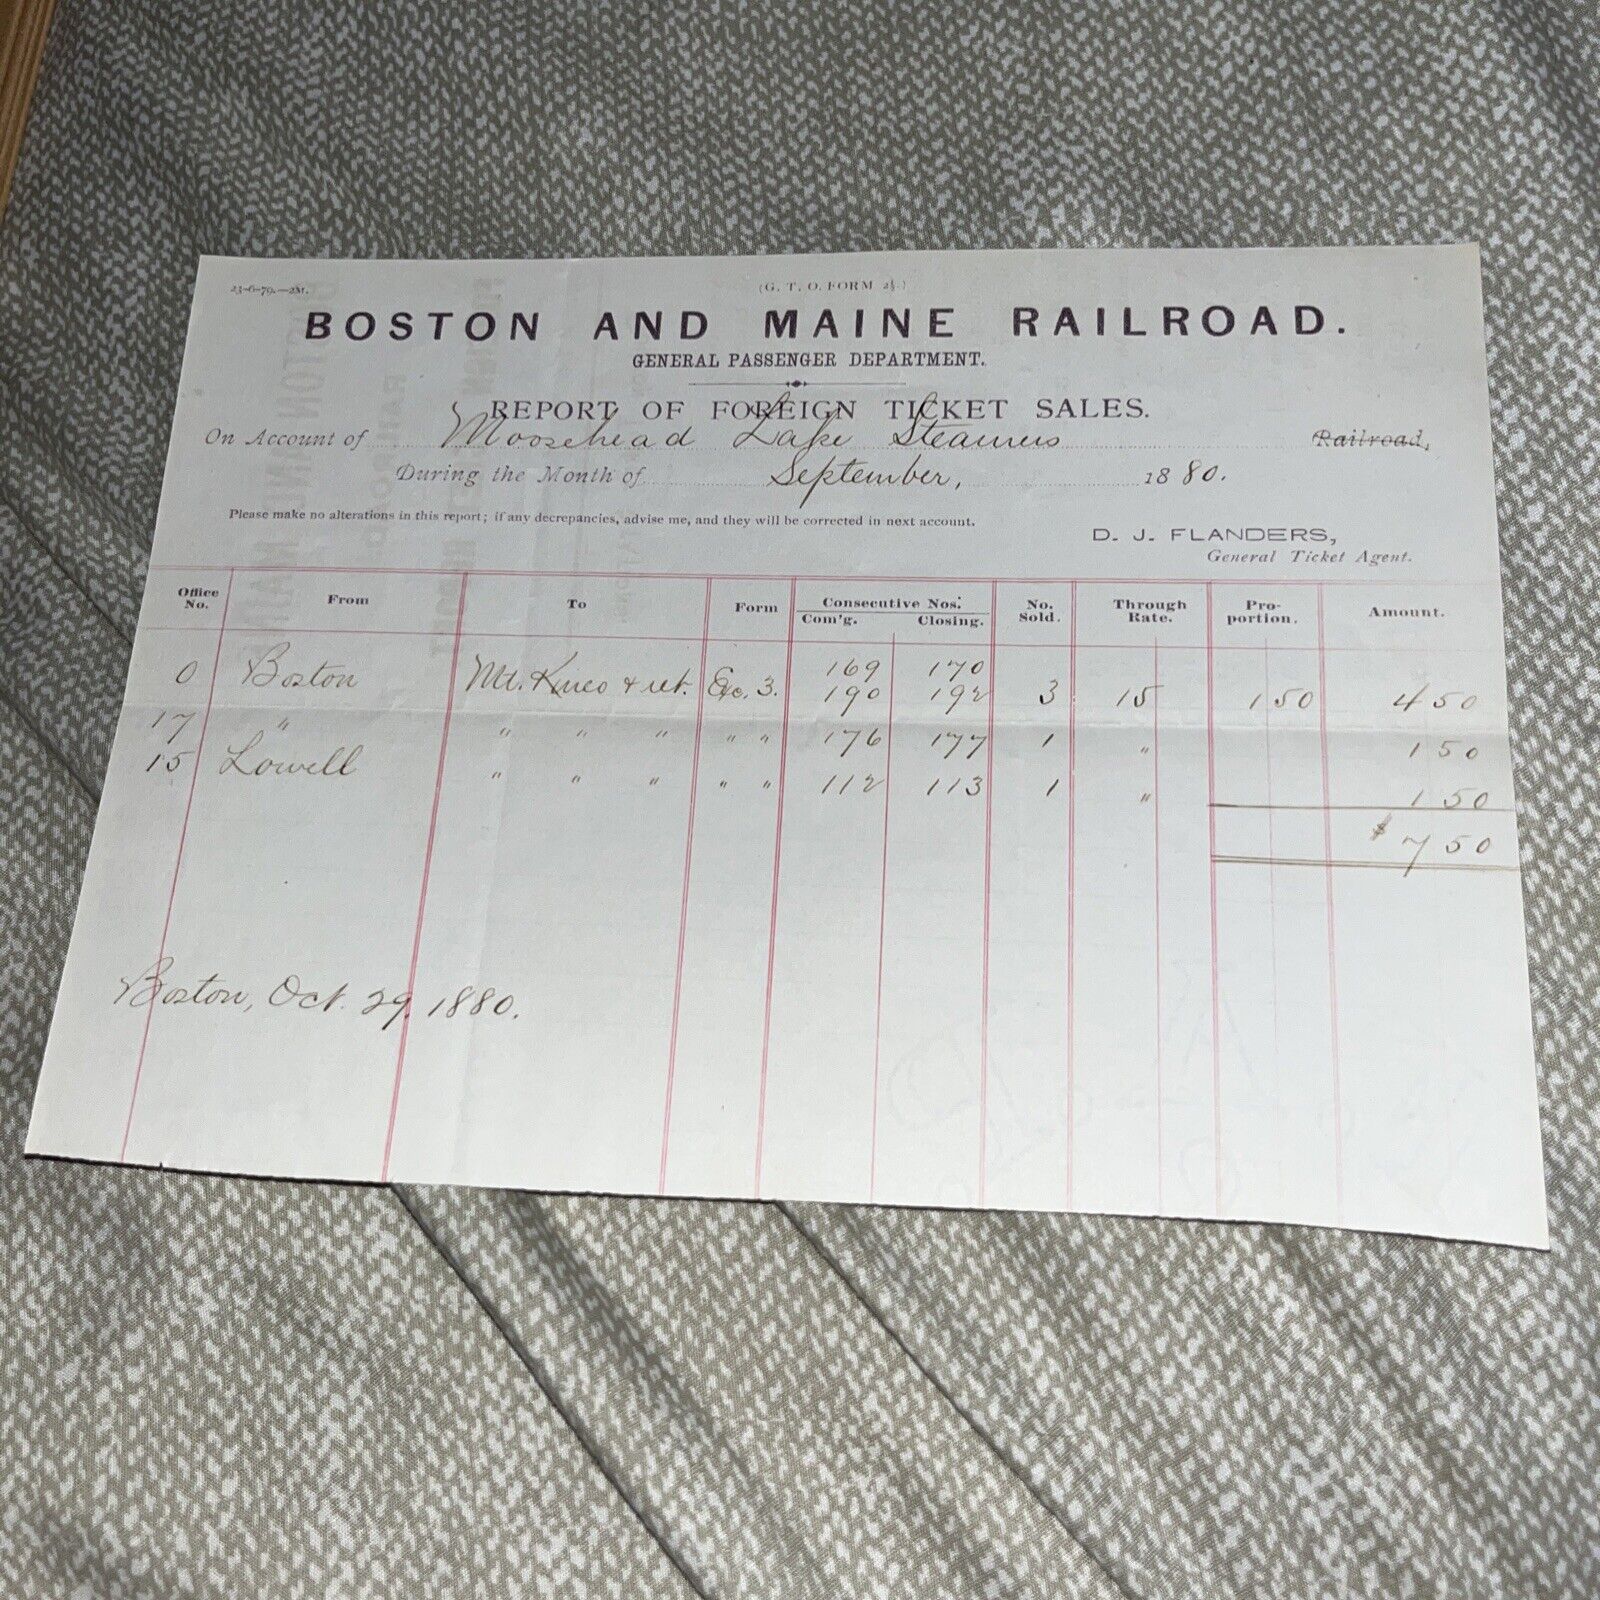 1880 Boston and Maine Railroad Invoice for Moosehead Lake Steamers Account